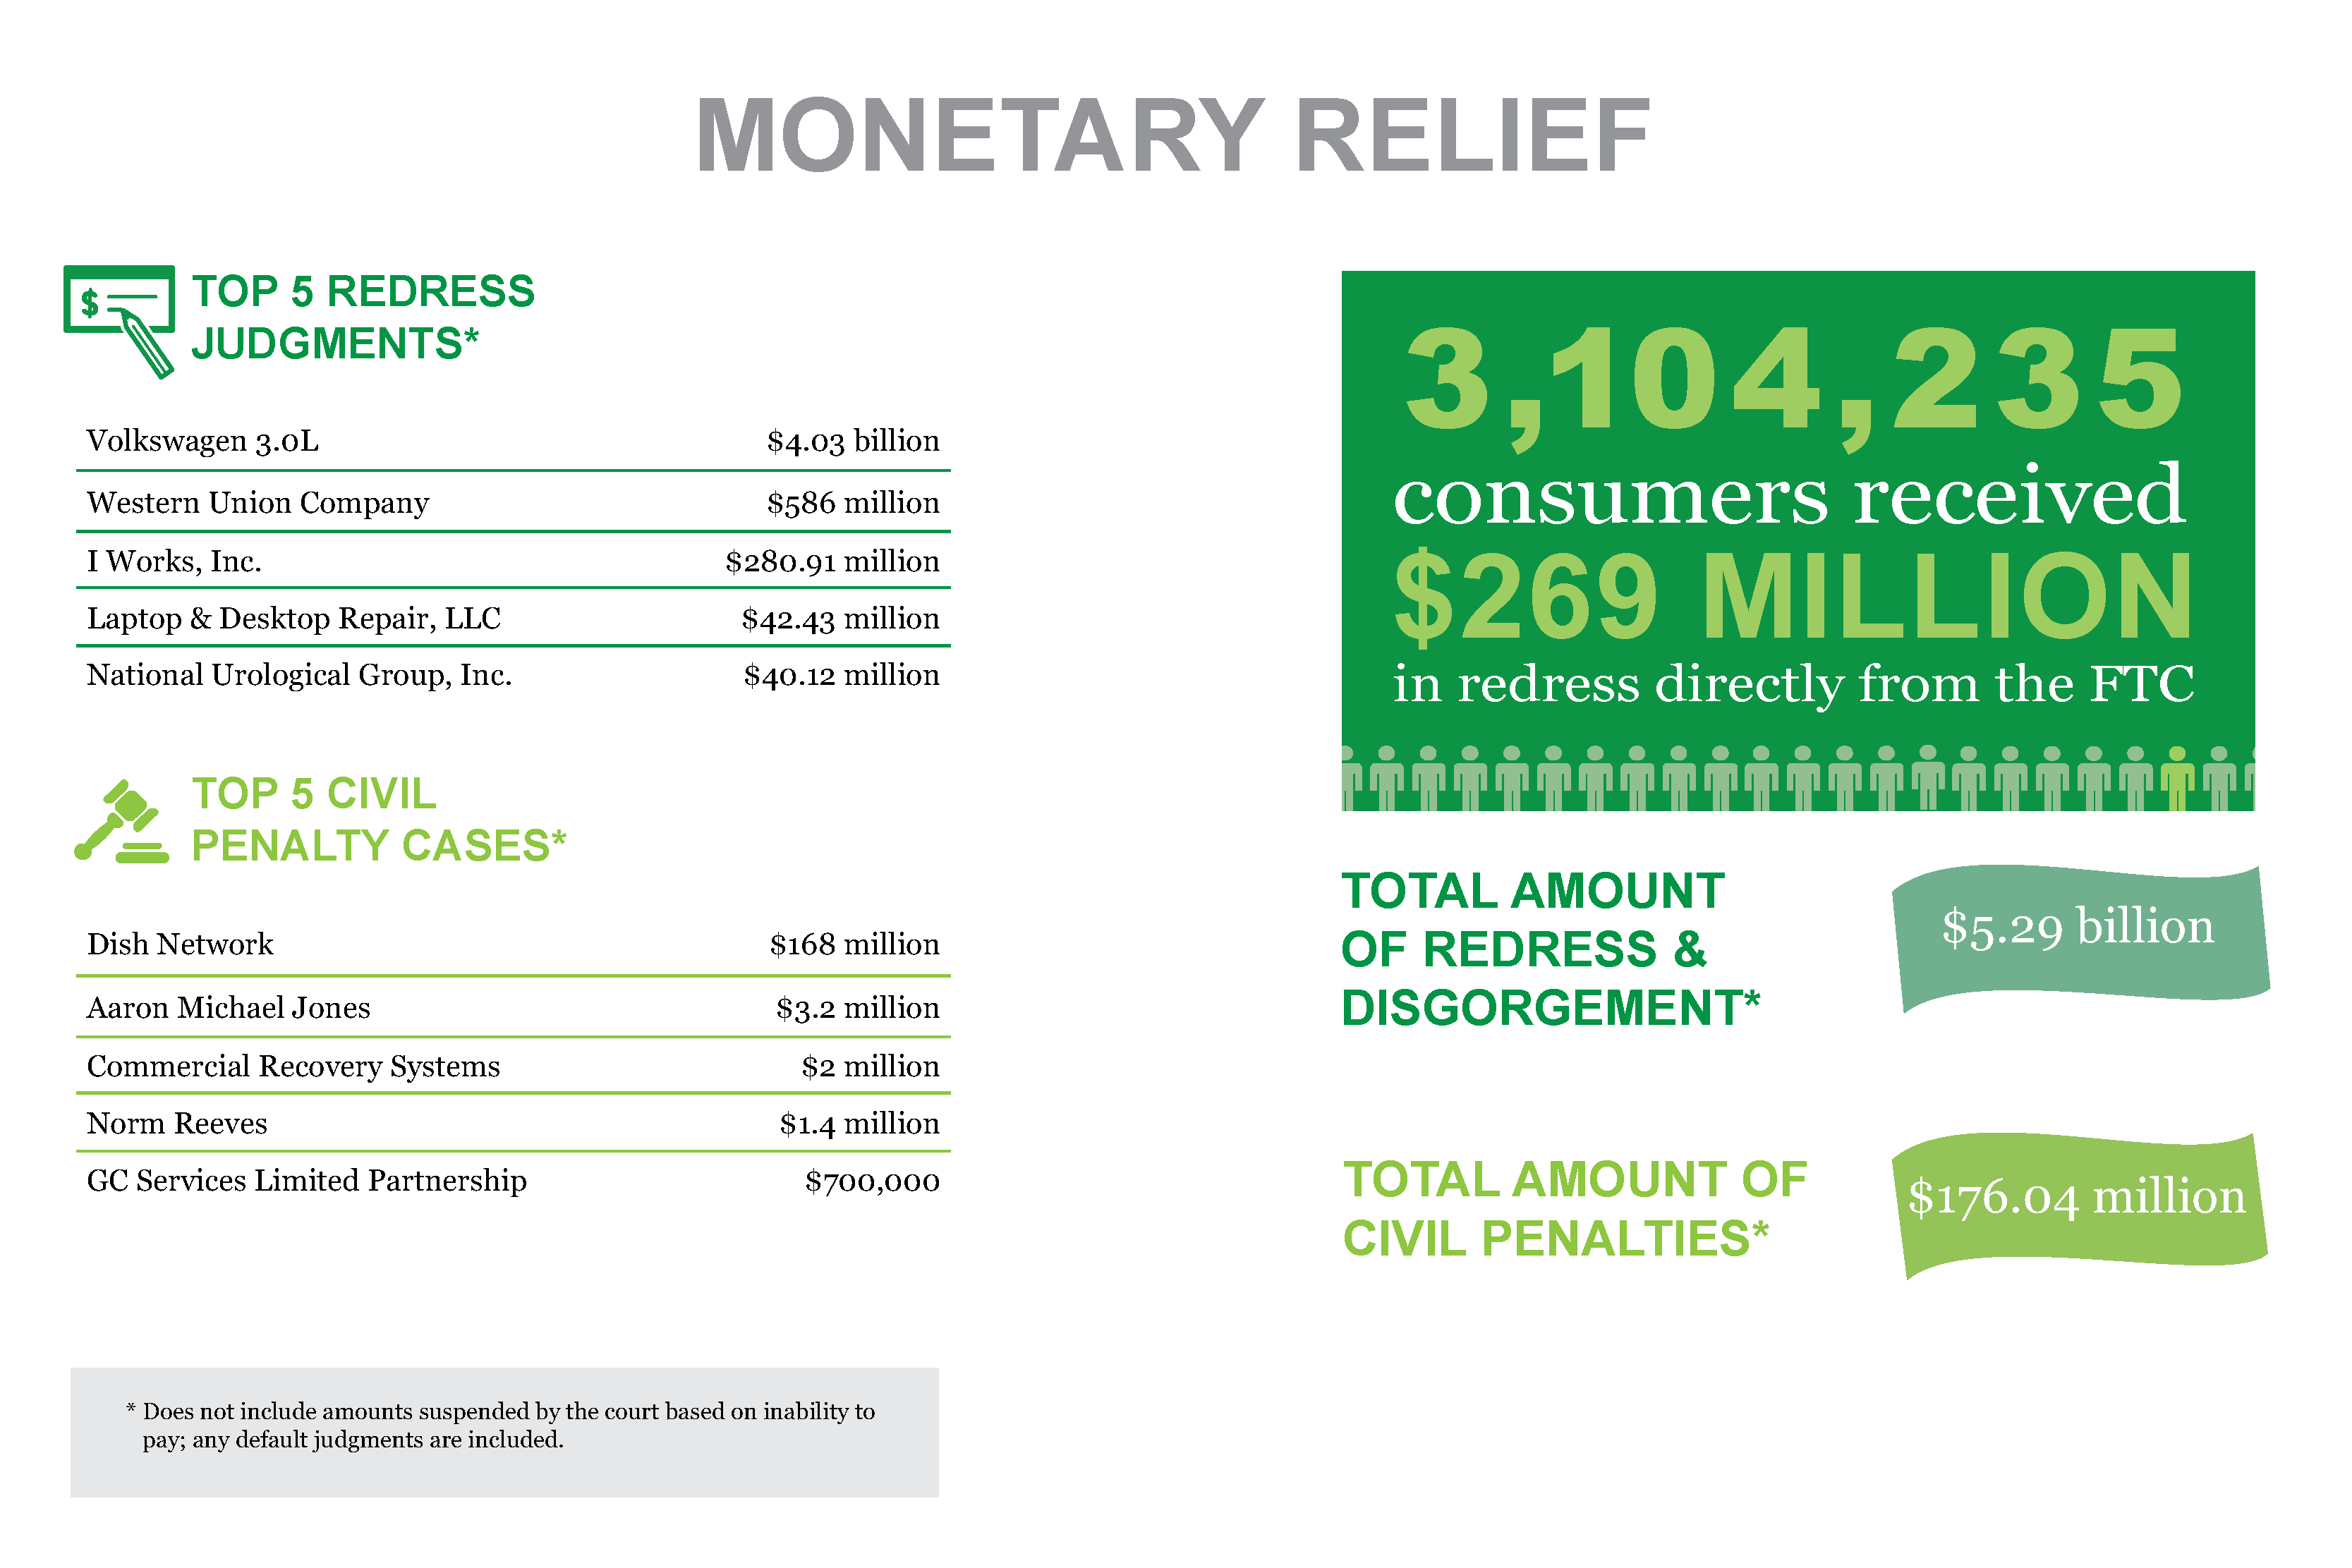 Stats & Data 2017 Monetary Relief infographic